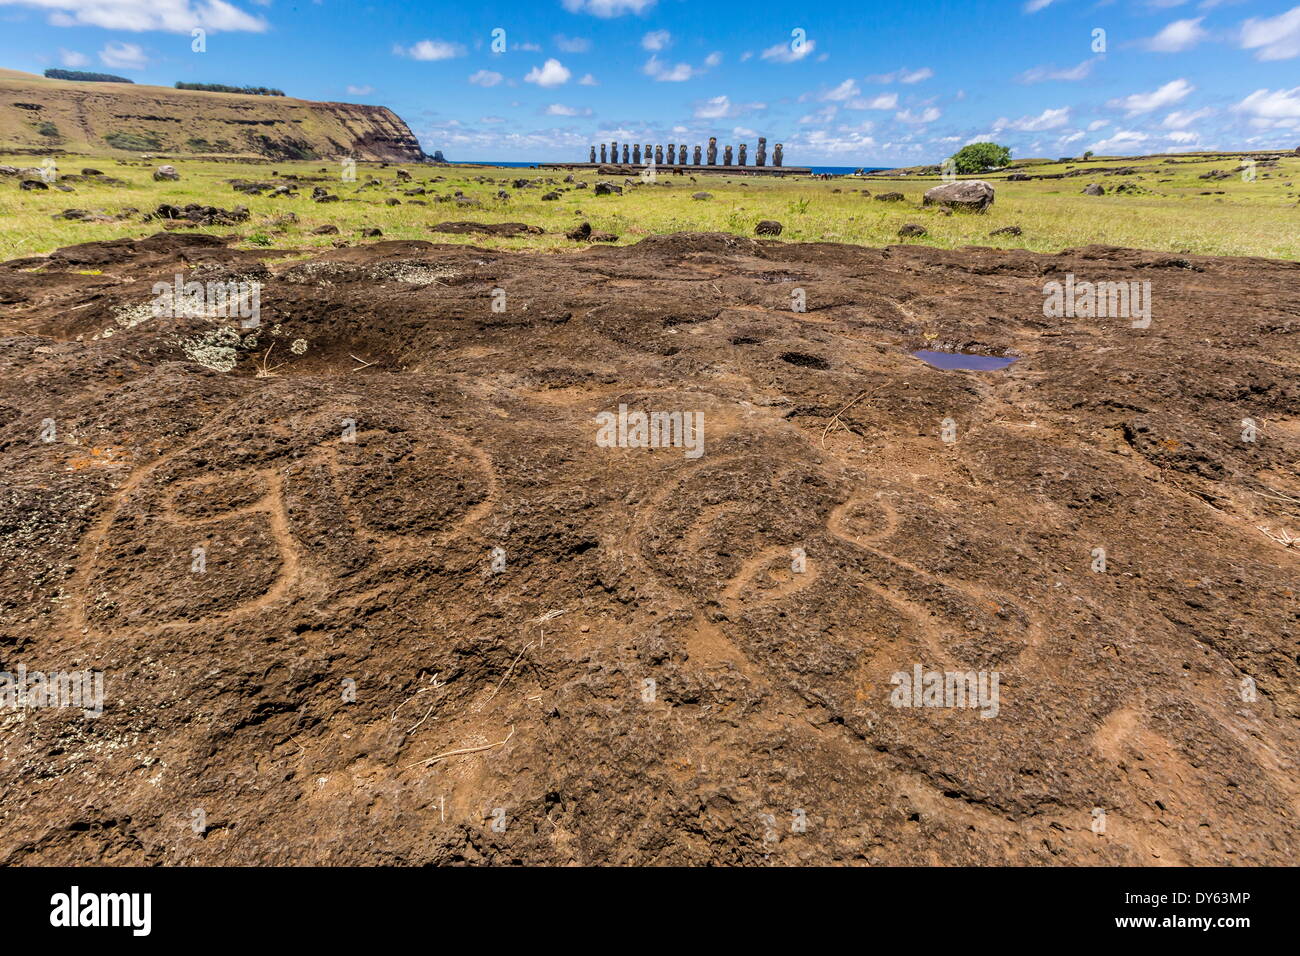 Petroglyphs carved in the lava at the restored ceremonial site of Ahu Tongariki on Easter Island (Rapa Nui), UNESCO Site, Chile Stock Photo